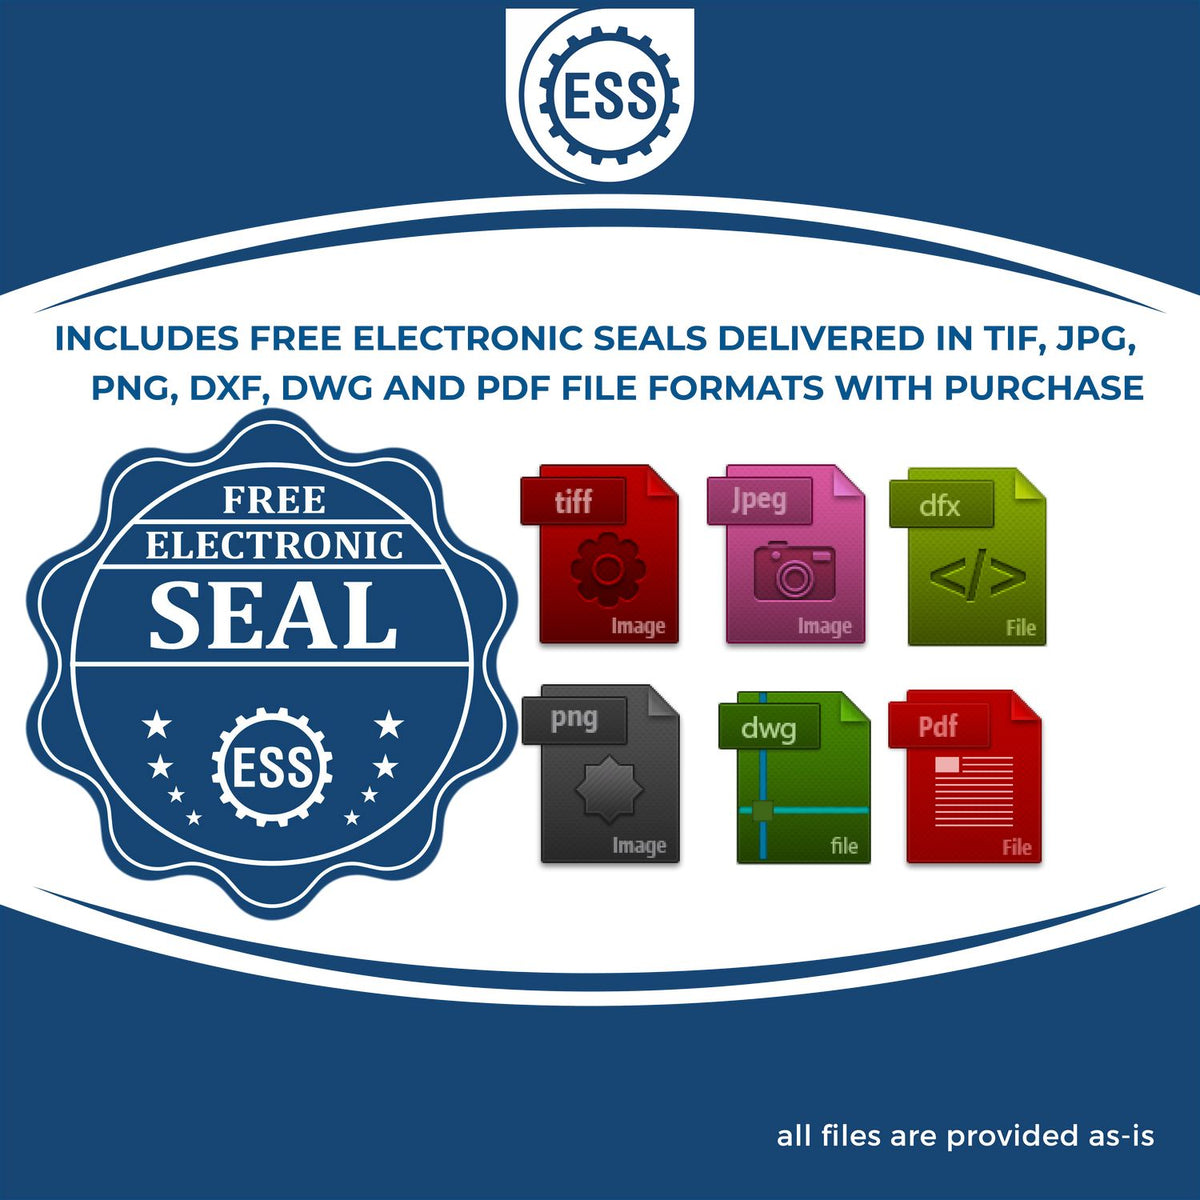 An infographic for the free electronic seal for the Hybrid Nebraska Land Surveyor Seal illustrating the different file type icons such as DXF, DWG, TIF, JPG and PNG.